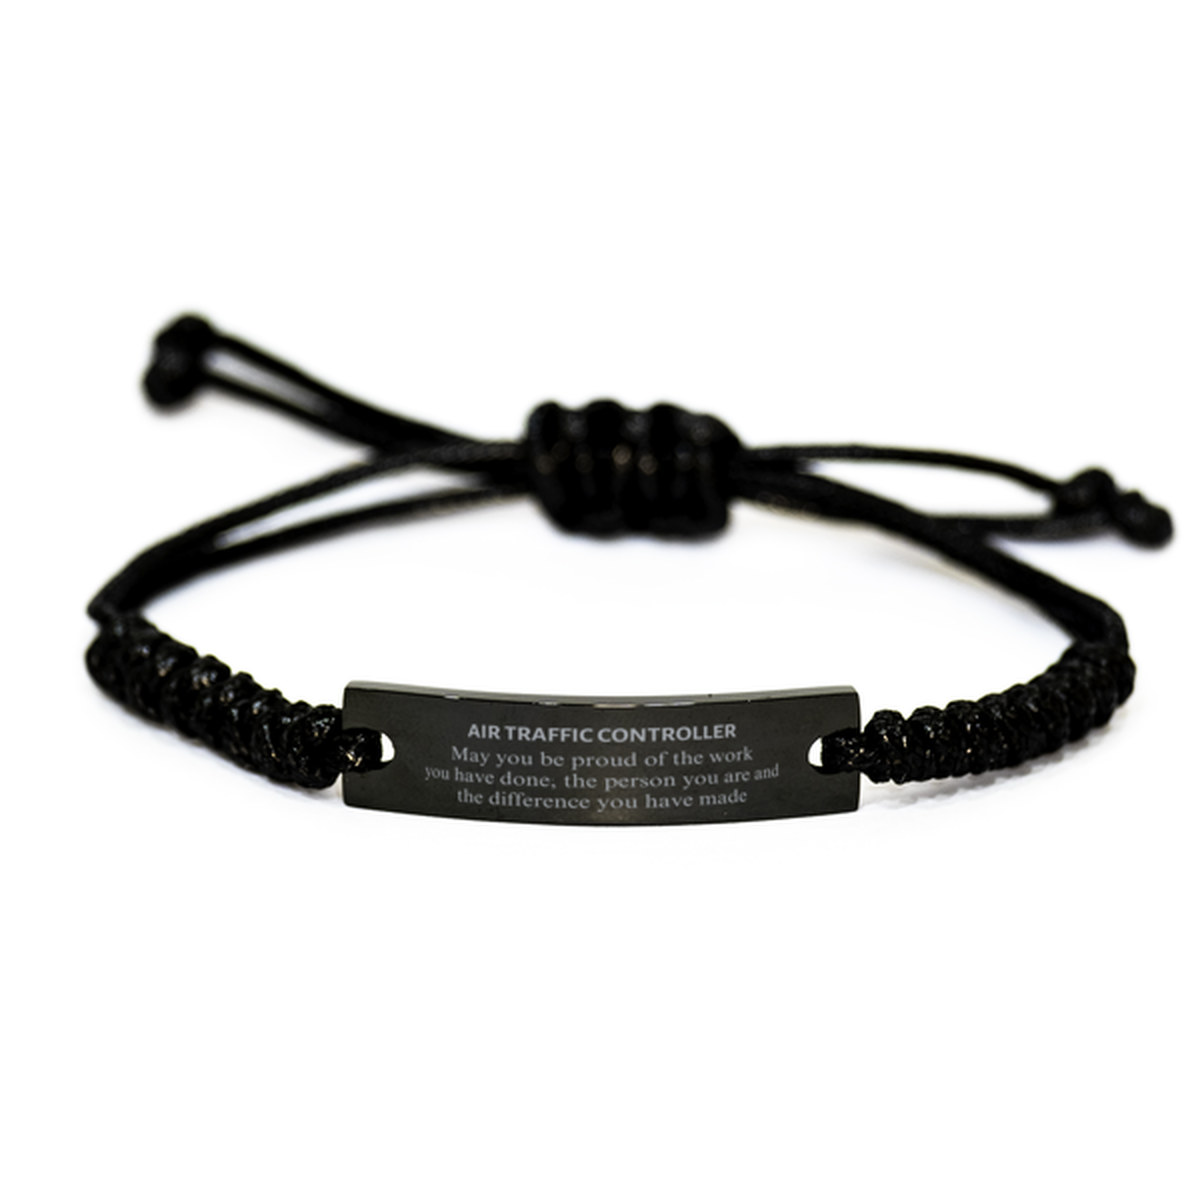 Air Traffic Controller May you be proud of the work you have done, Retirement Air Traffic Controller Black Rope Bracelet for Colleague Appreciation Gifts Amazing for Air Traffic Controller